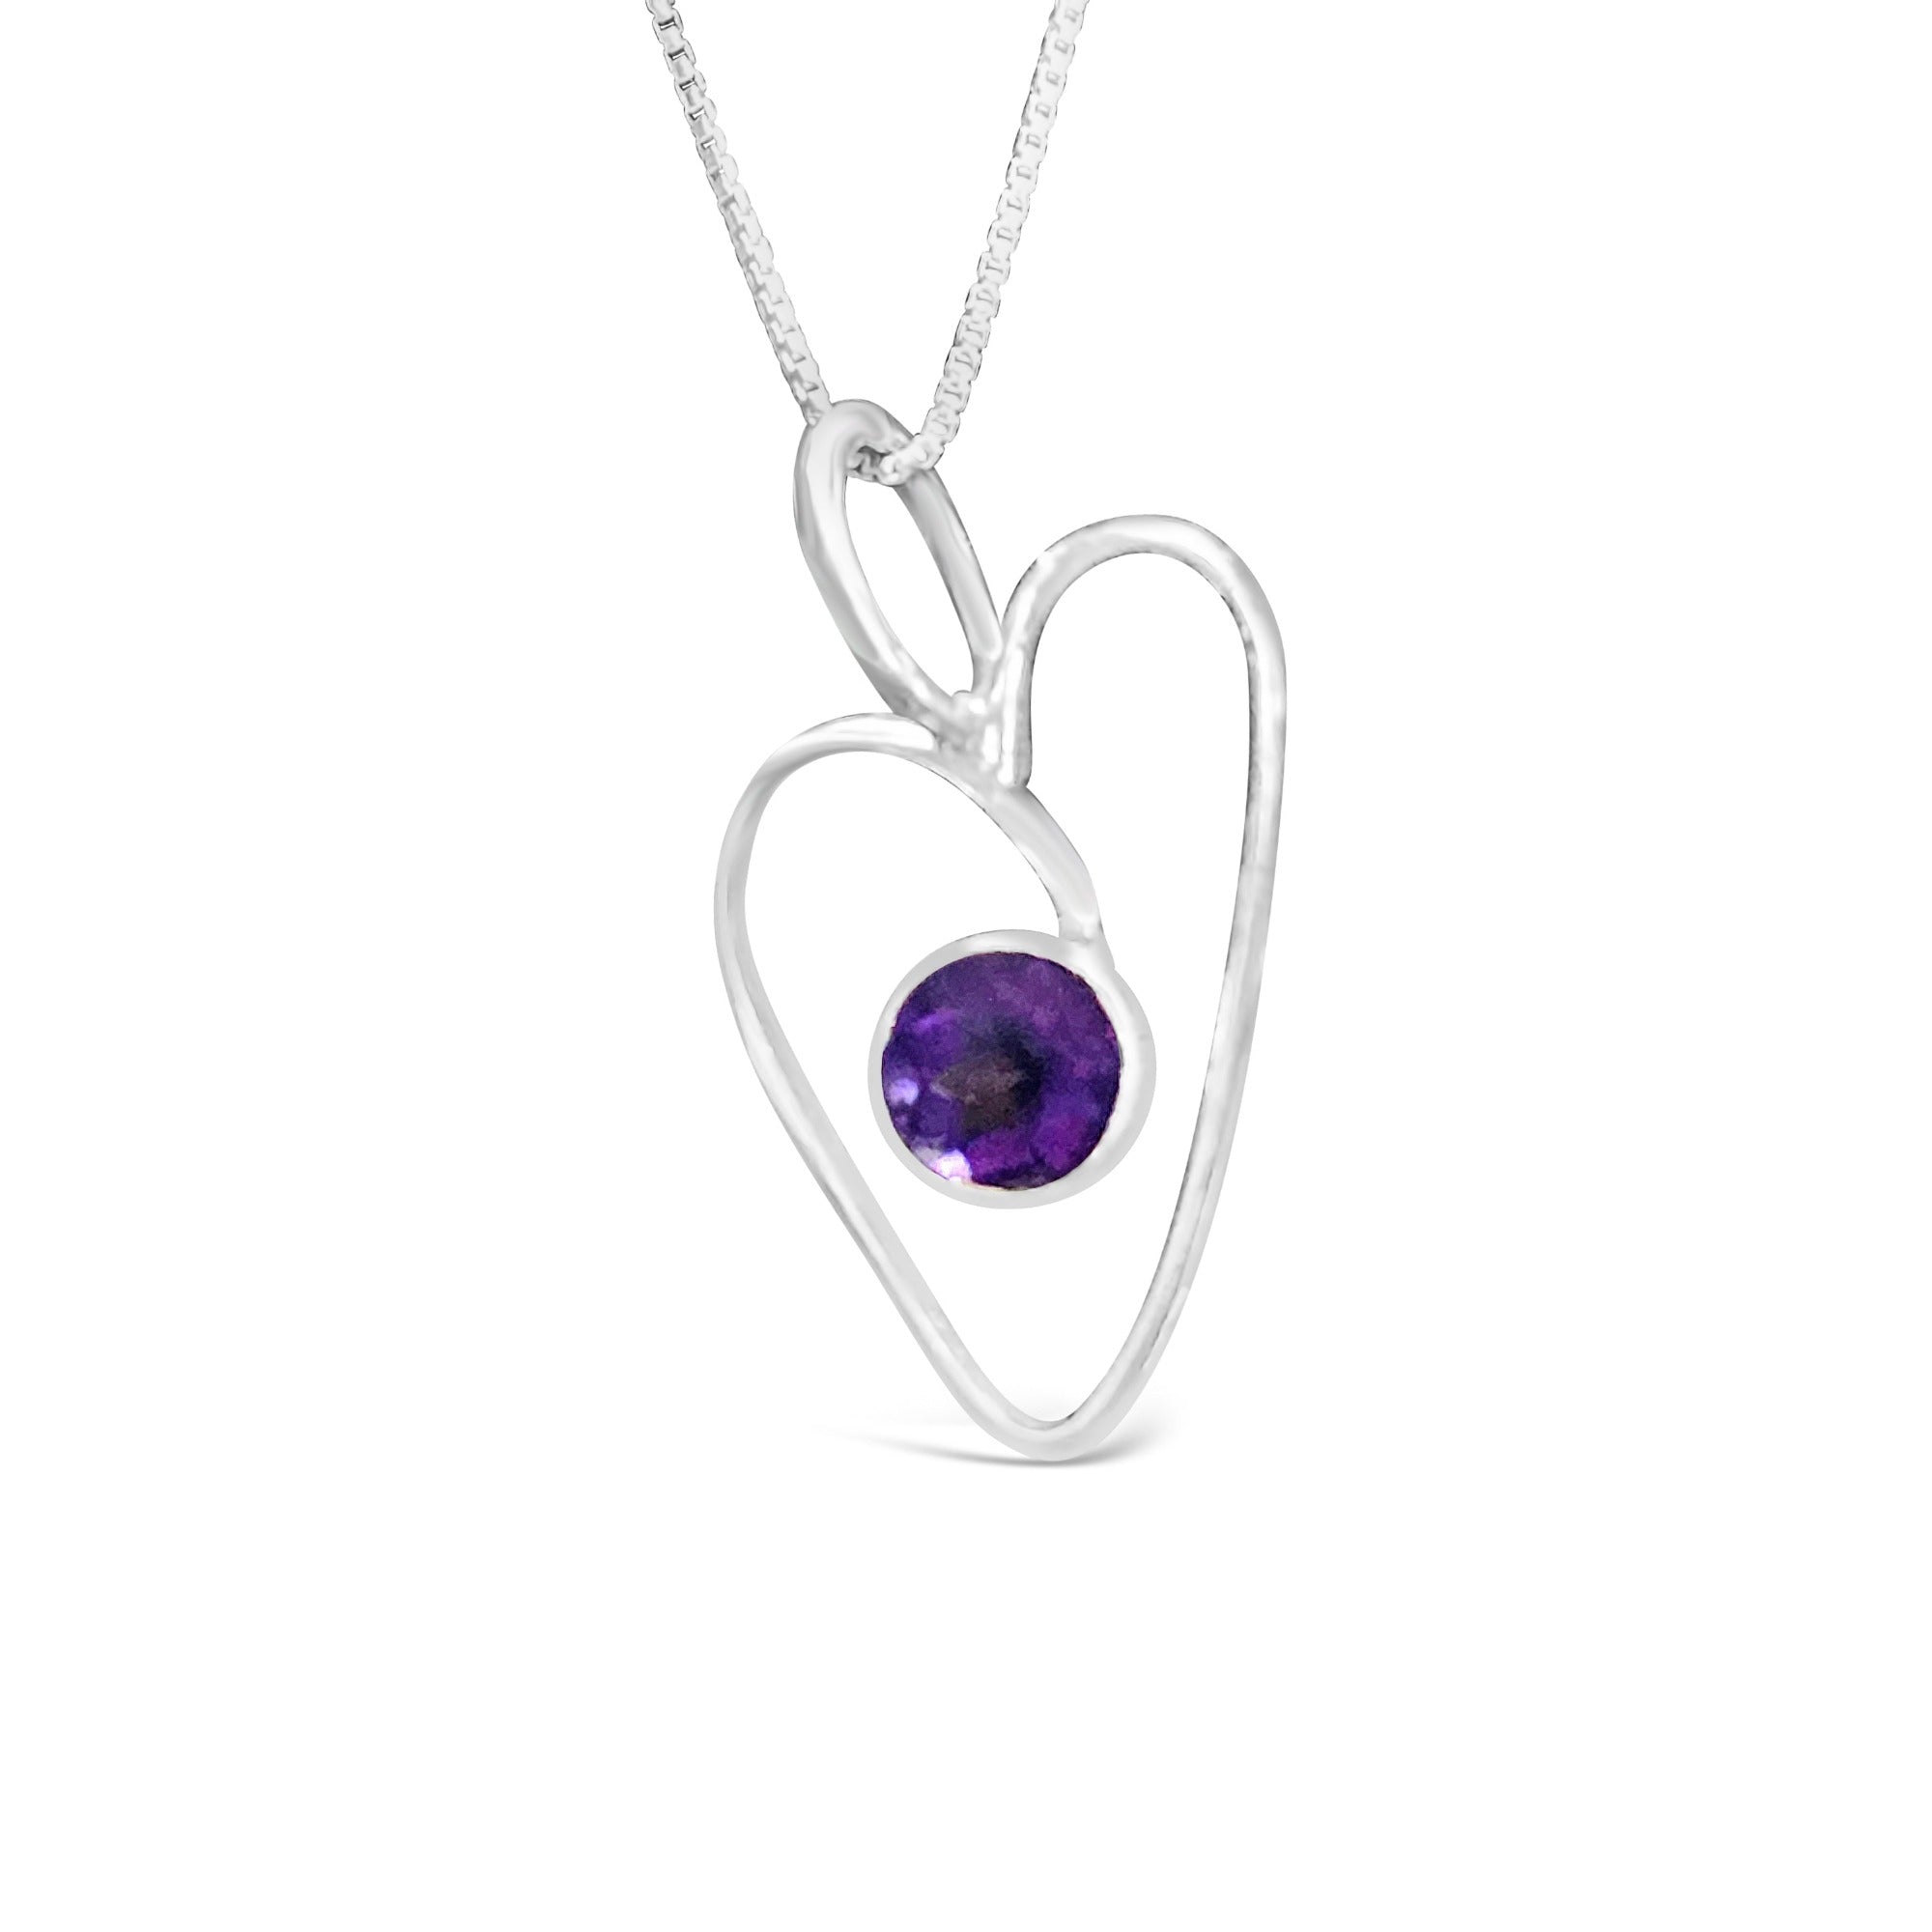 Be My Love Sterling Silver Heart Necklace with Amethyst